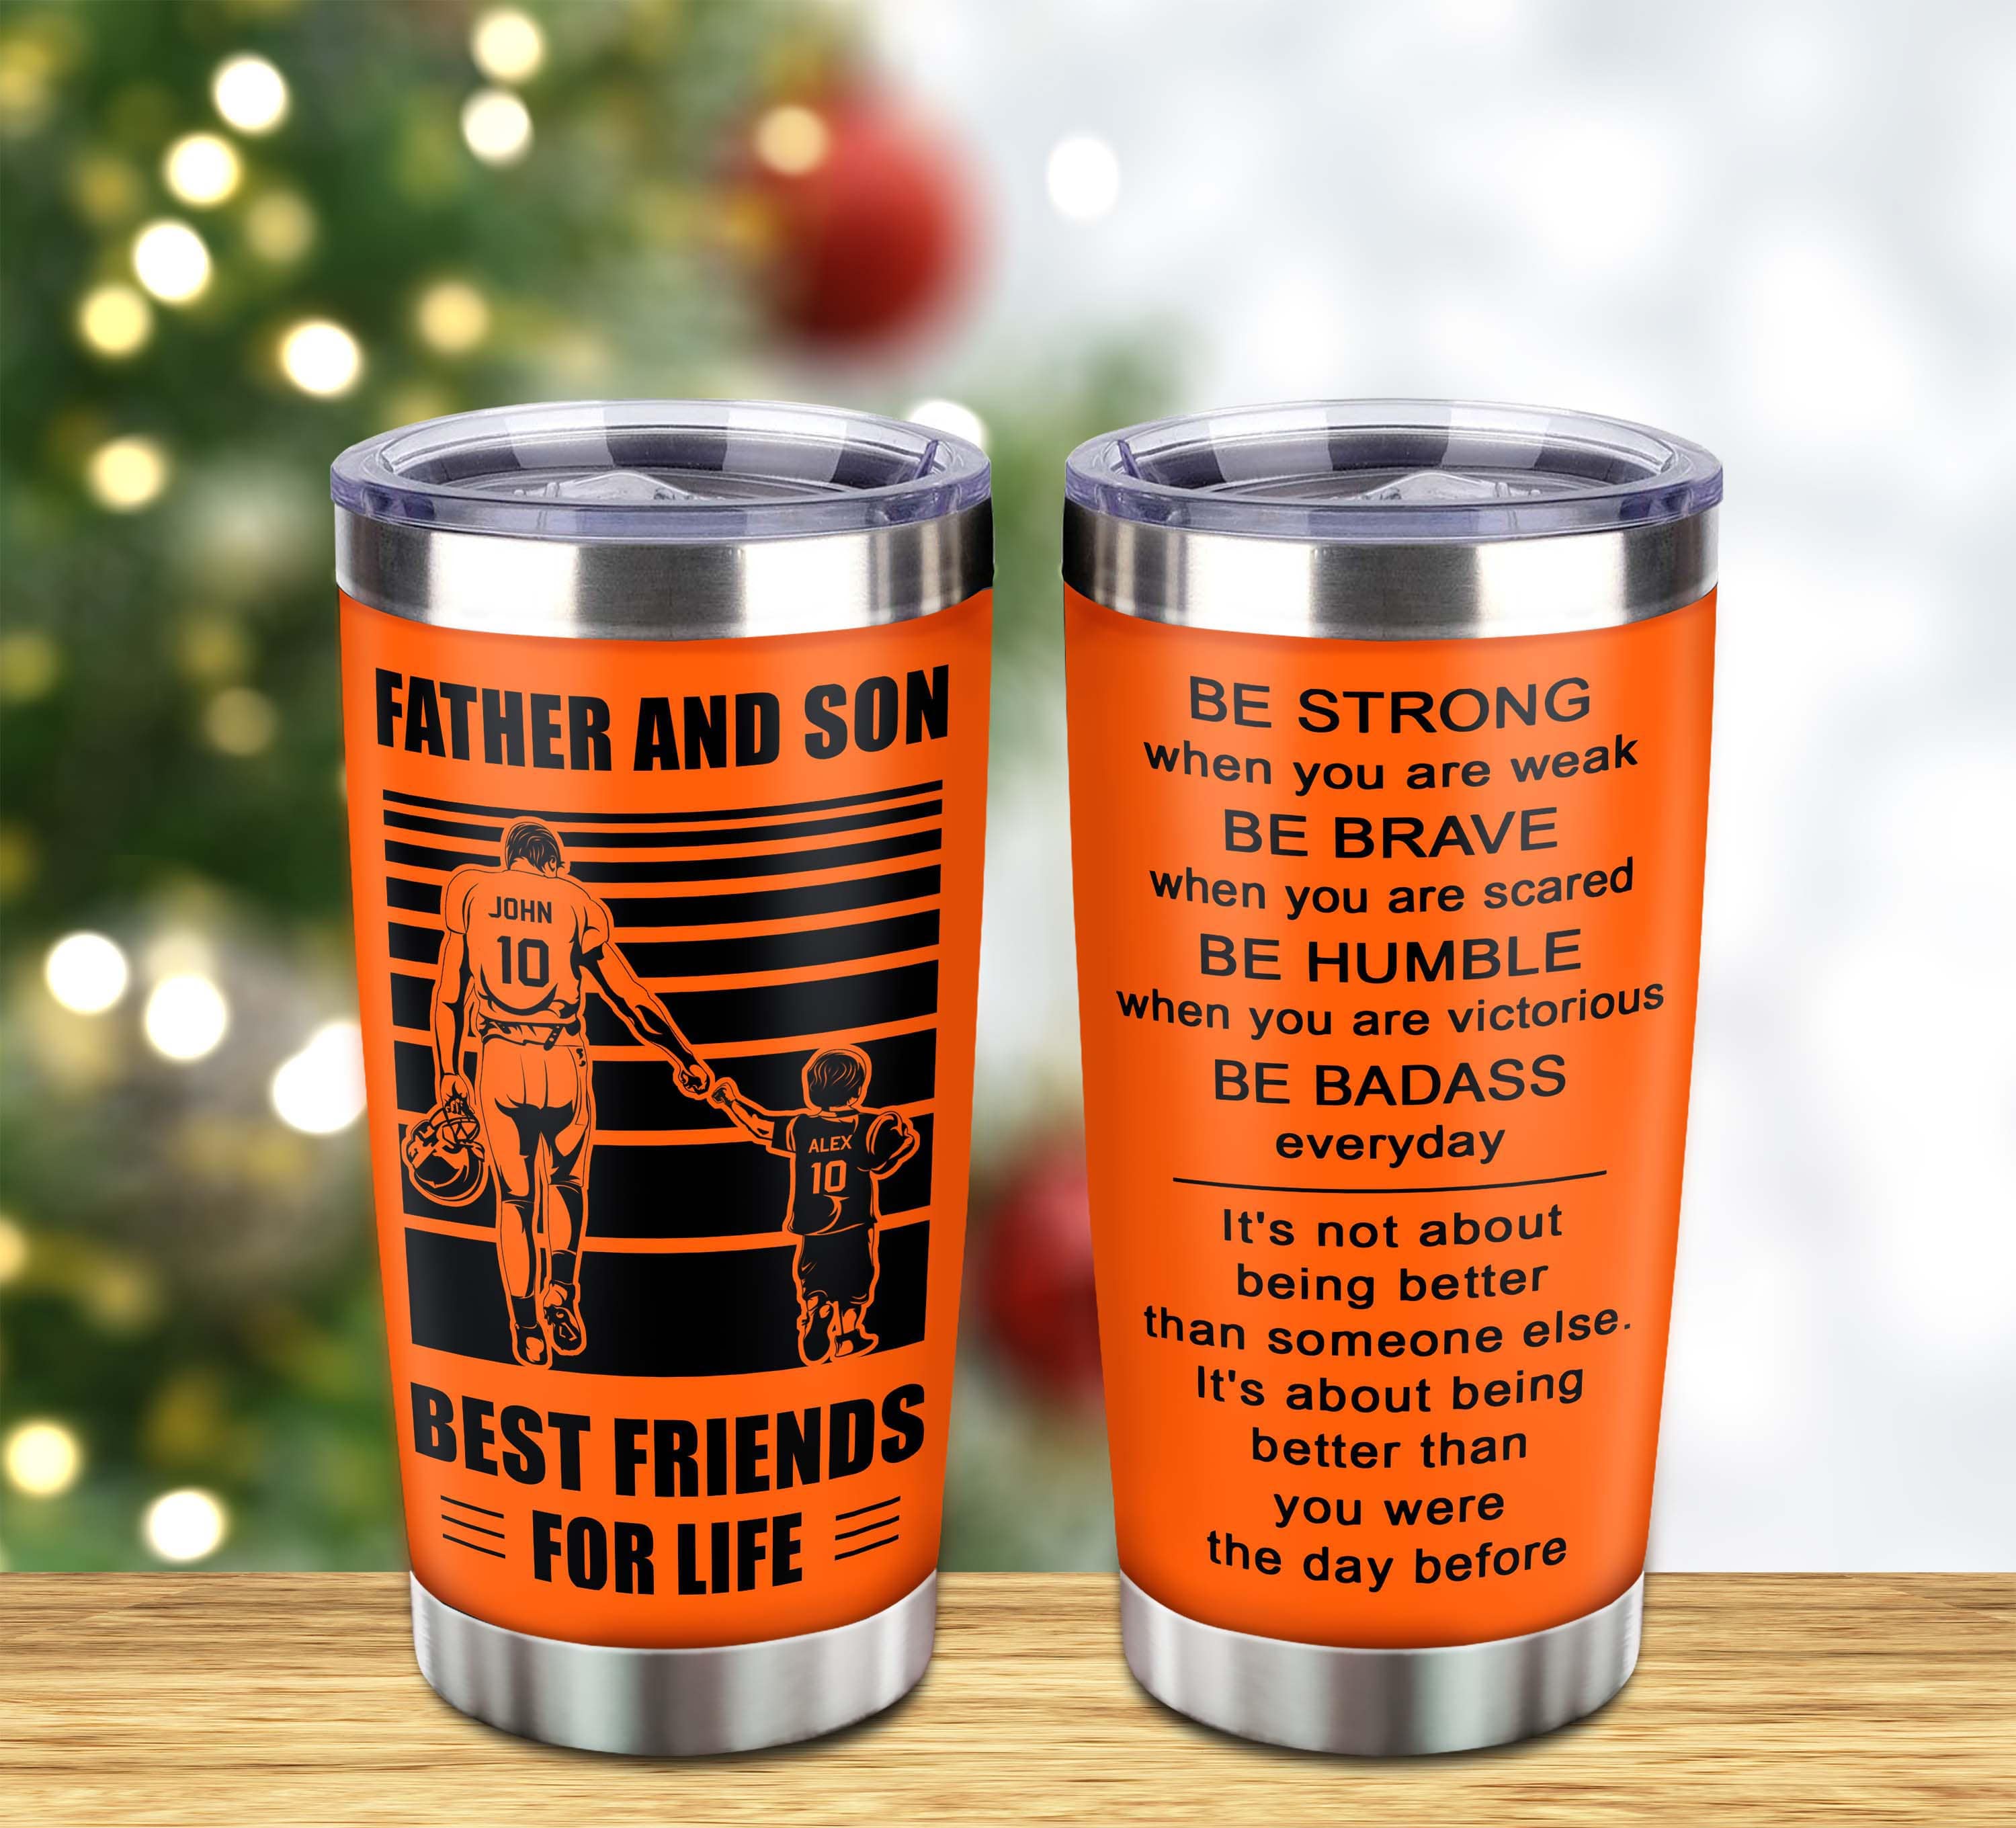 Customizable Baseball Tumbler, Gifts From Dad To Son Father And Son Best Friend For Life With Inspriration Message